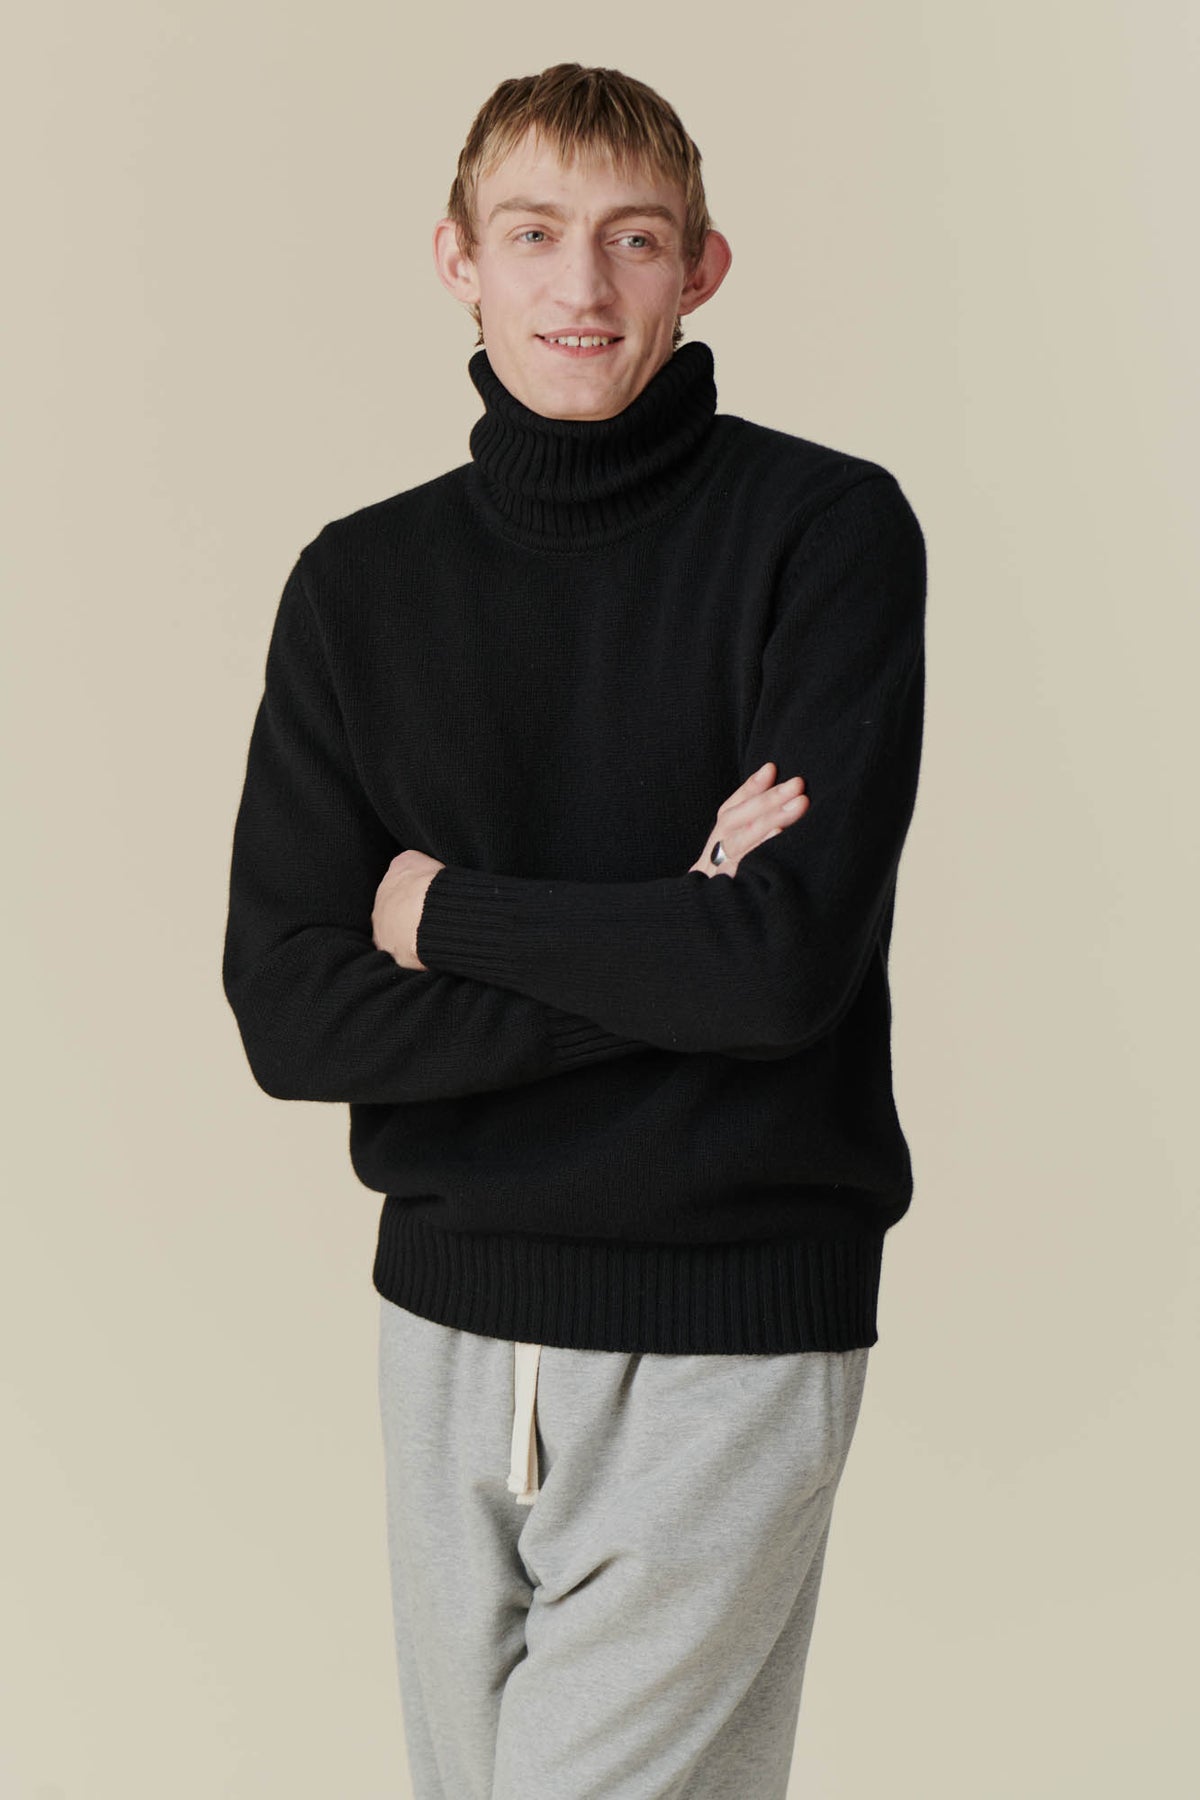 
            Smiley, white male with arms crossed wearing lambswool roll neck in black.